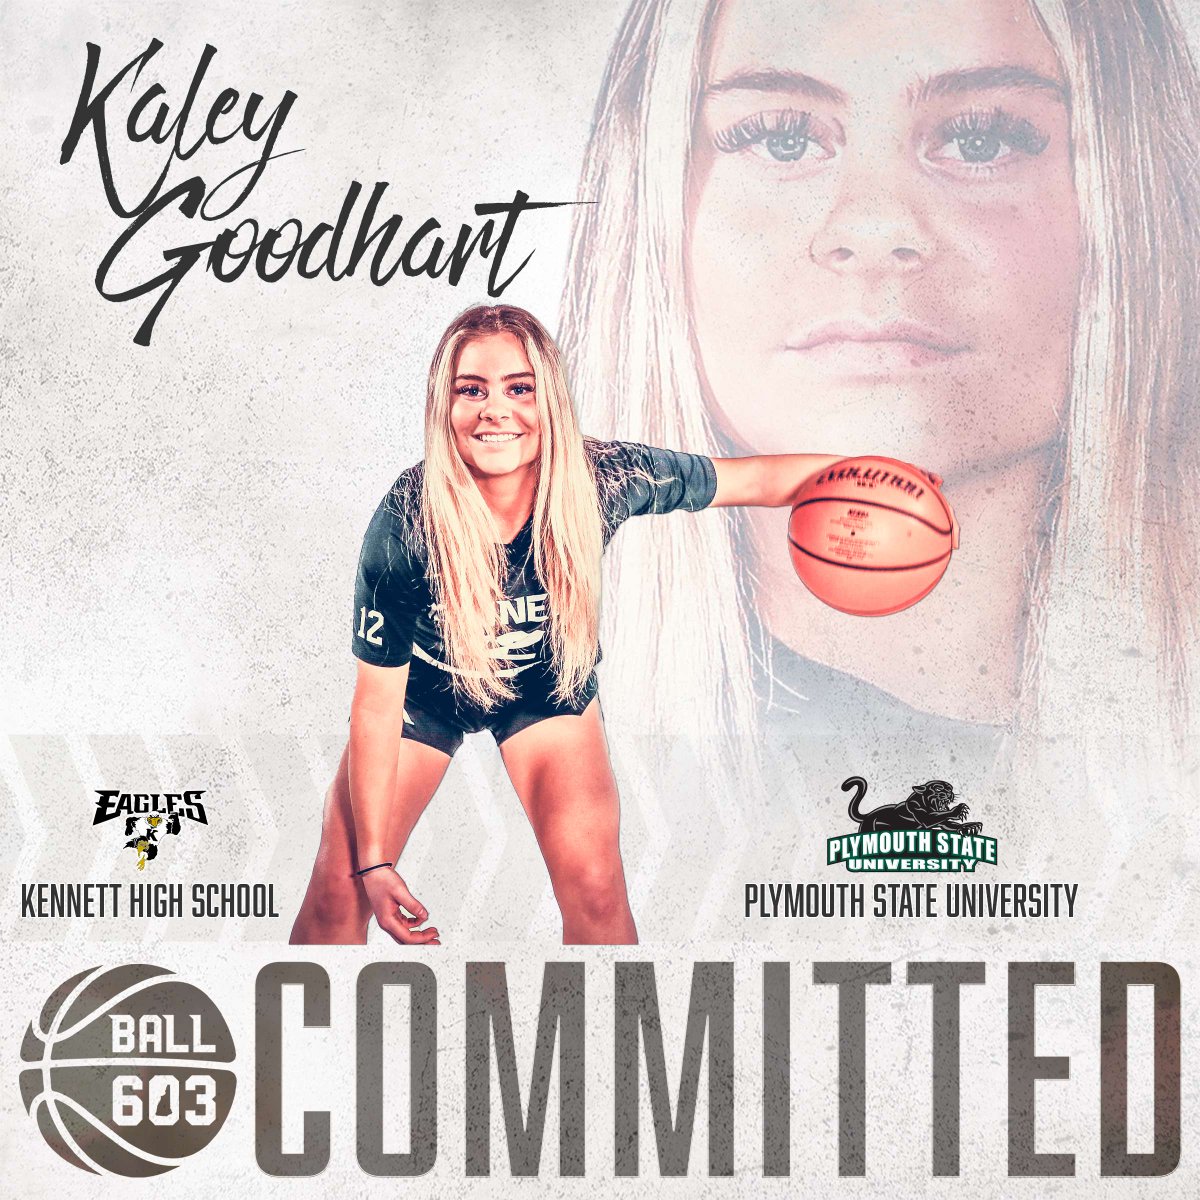 Upon graduating from Kennett HS this spring, Kaley Goodhart will continue her playing career at Plymouth State University. Kaley, a 2X 1st Team All-State pick, plans to major in Psychology while playing for the D-III Panthers. #Ball603committed @PSUPanthers 📸 Jill Stevens